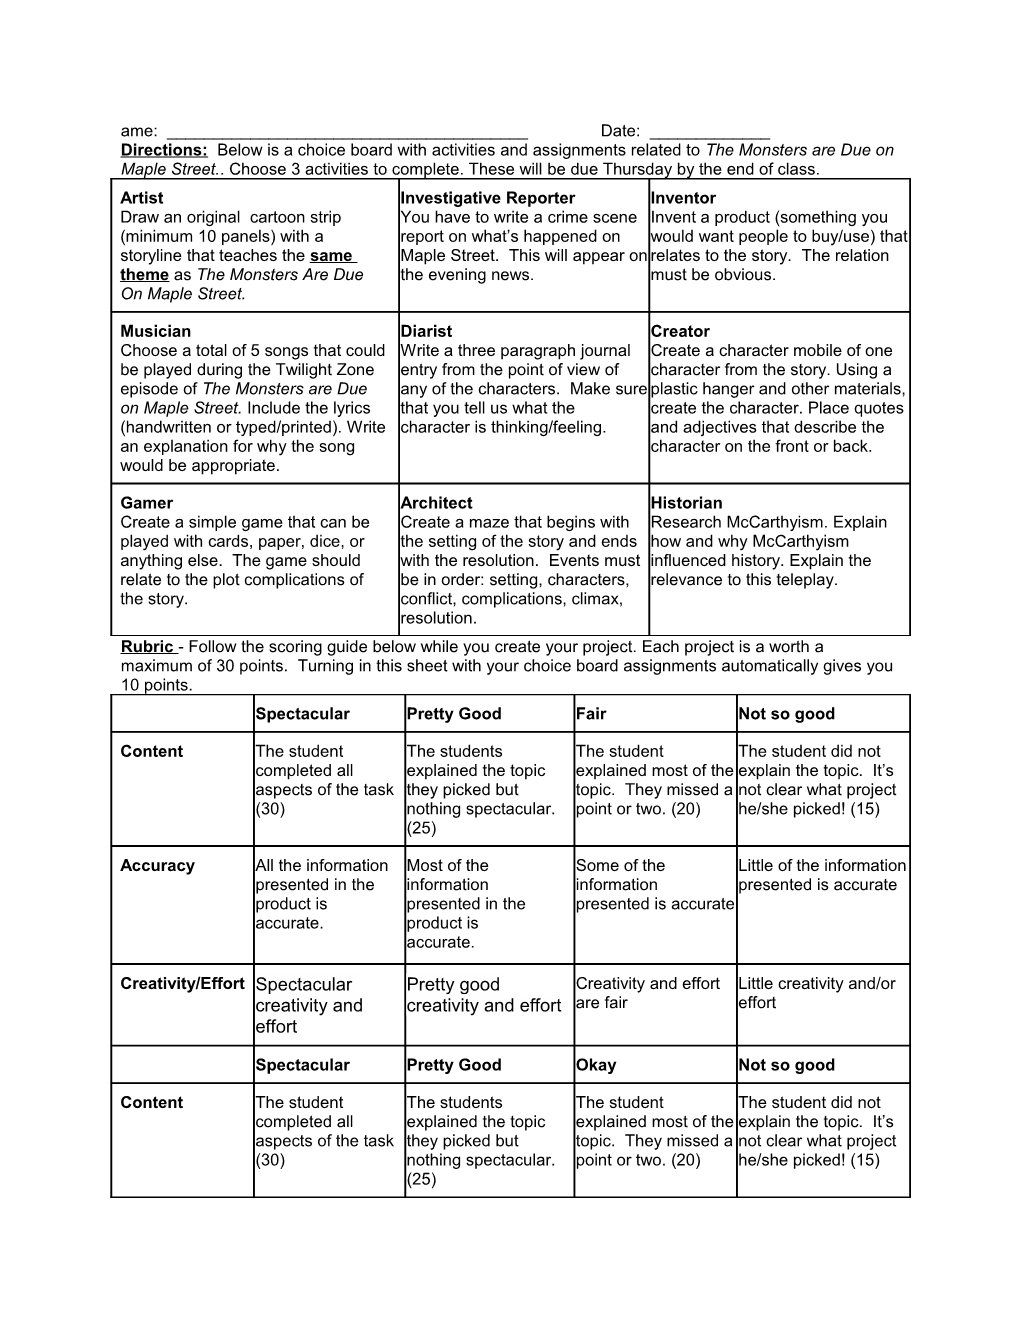 Rubric - Follow the Scoring Guide Below While You Create Your Project. Each Project Is